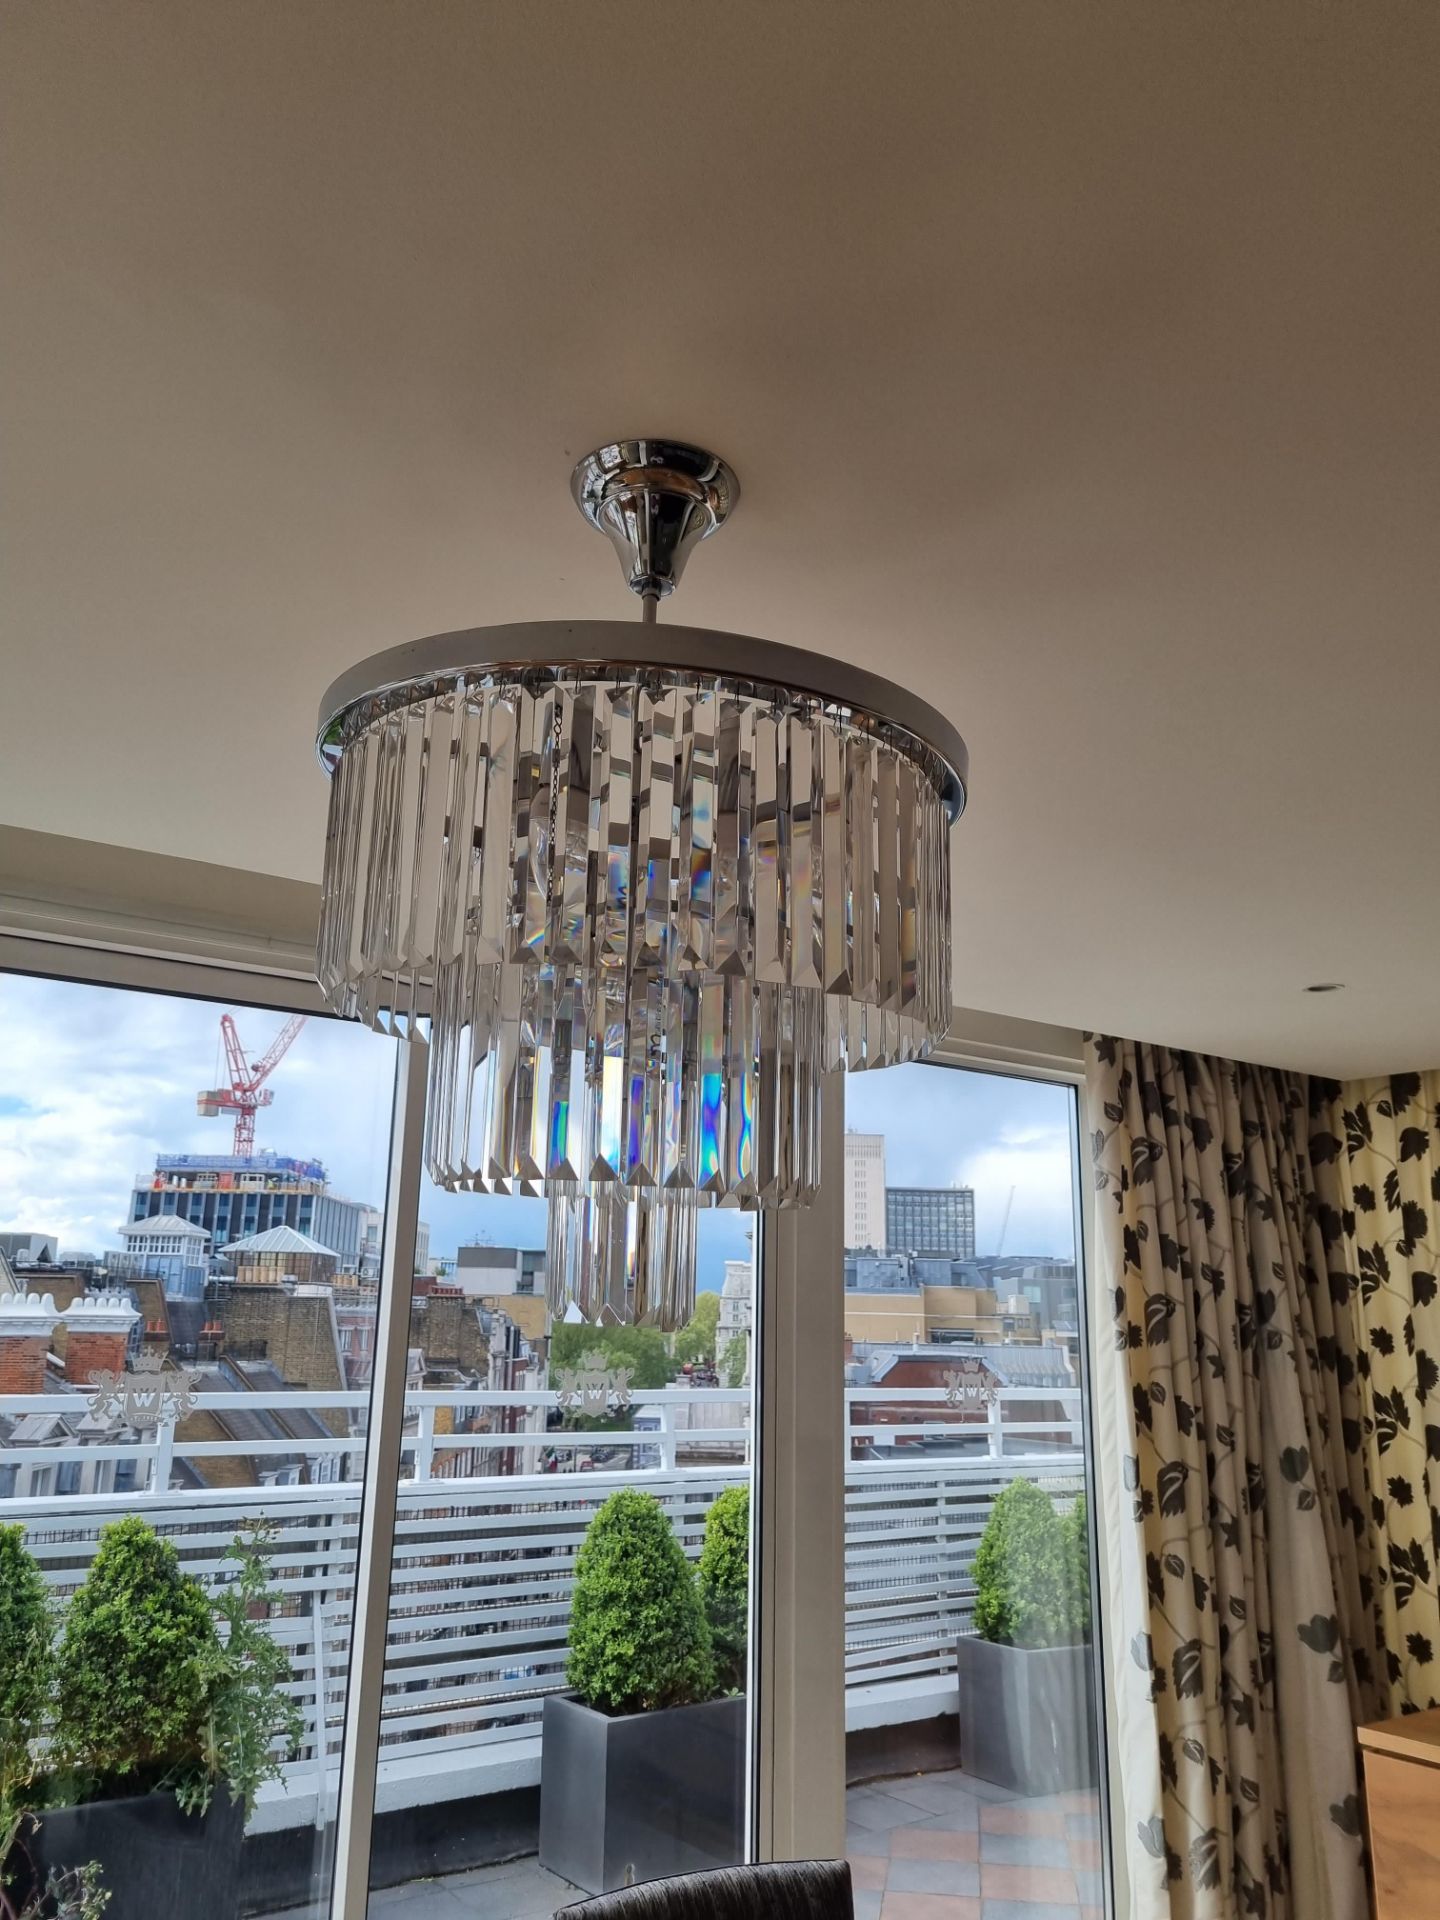 Odeon 3 tier chandelier a modern day interpretation of Venetian glass prism chandeliers from the - Image 2 of 2